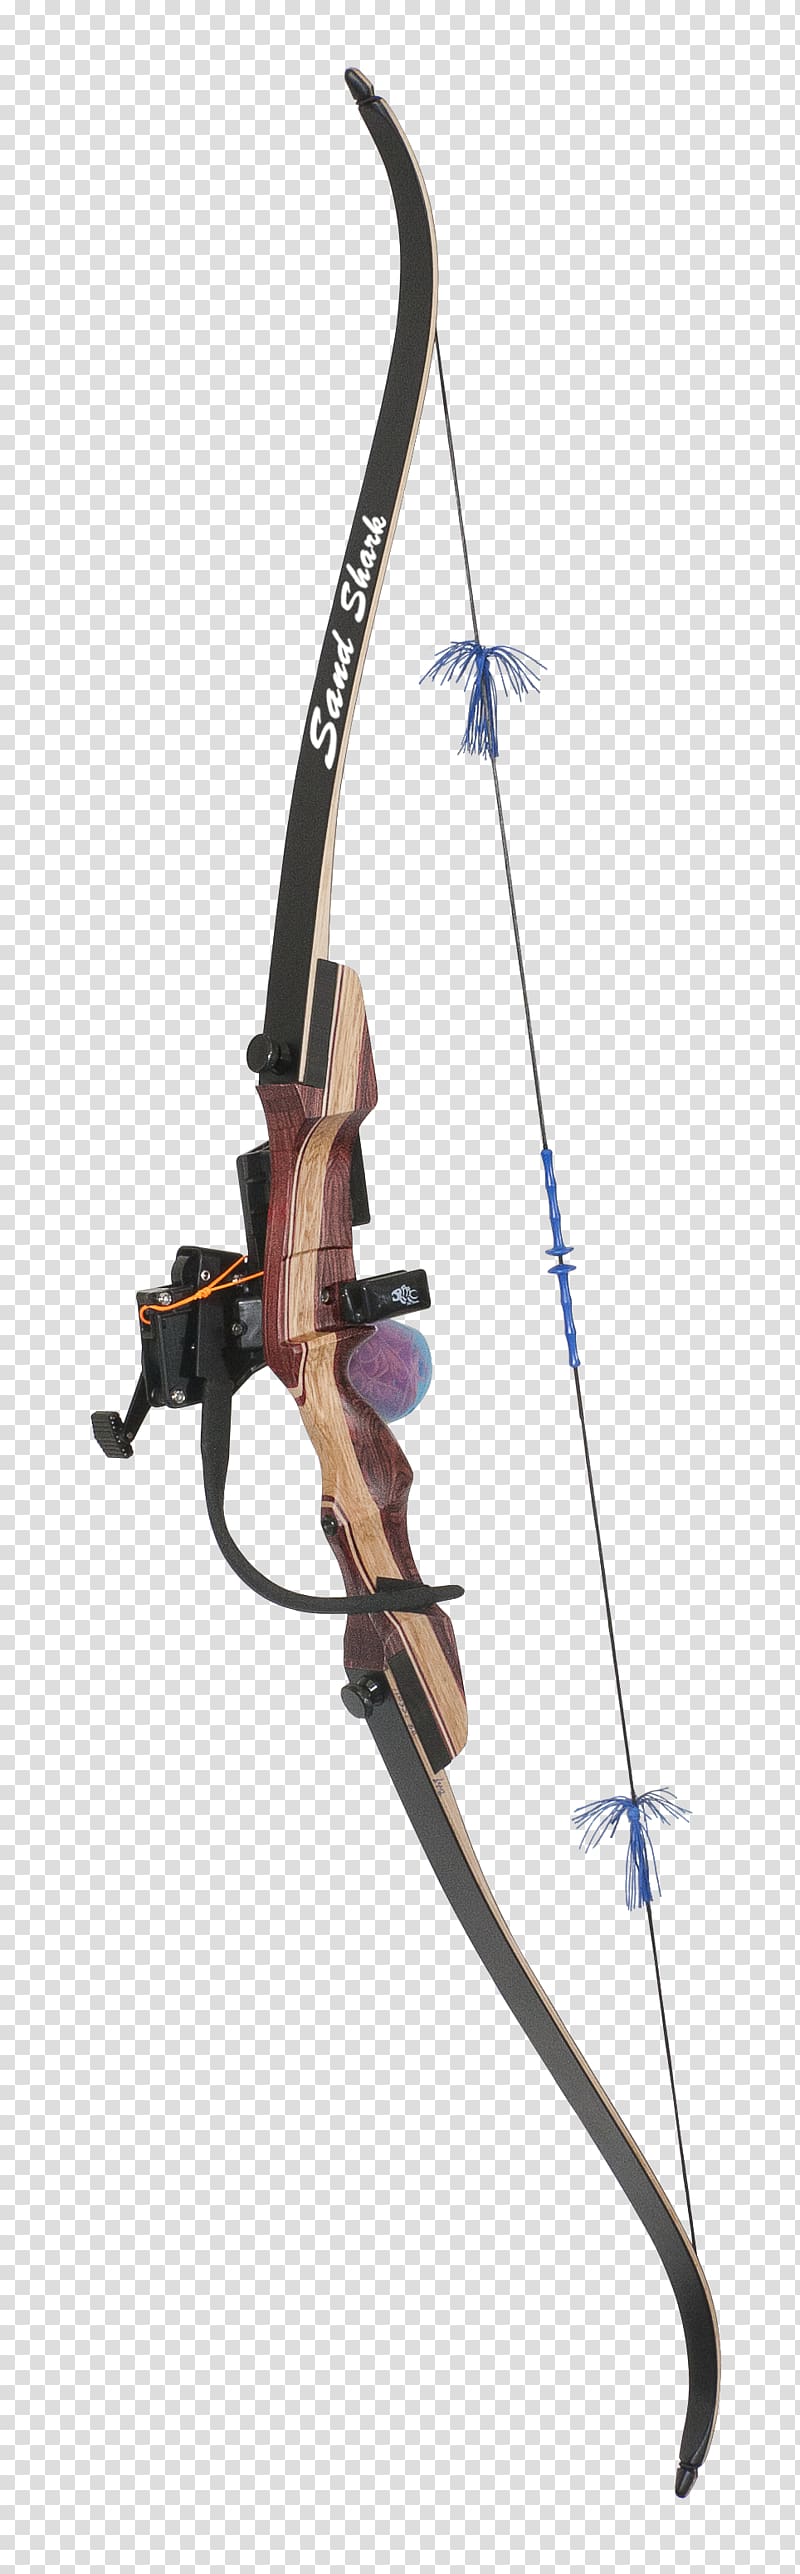 Compound Bows Bowfishing Bow and arrow Recurve bow, Fishing transparent background PNG clipart